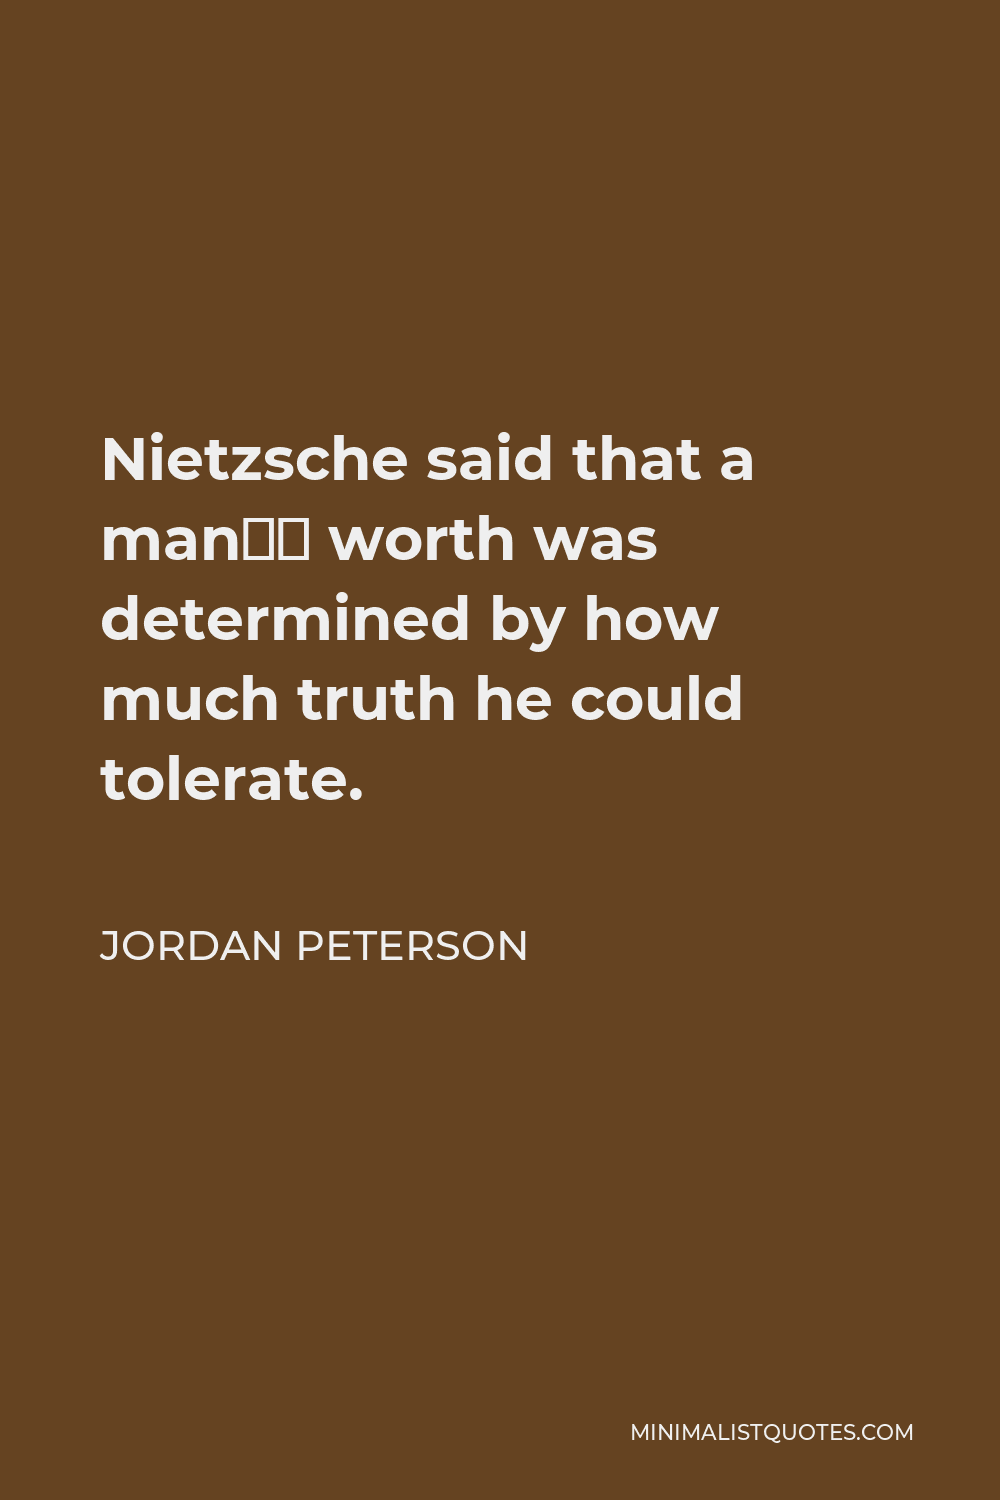 Jordan Peterson Quote - Nietzsche said that a man’s worth was determined by how much truth he could tolerate.